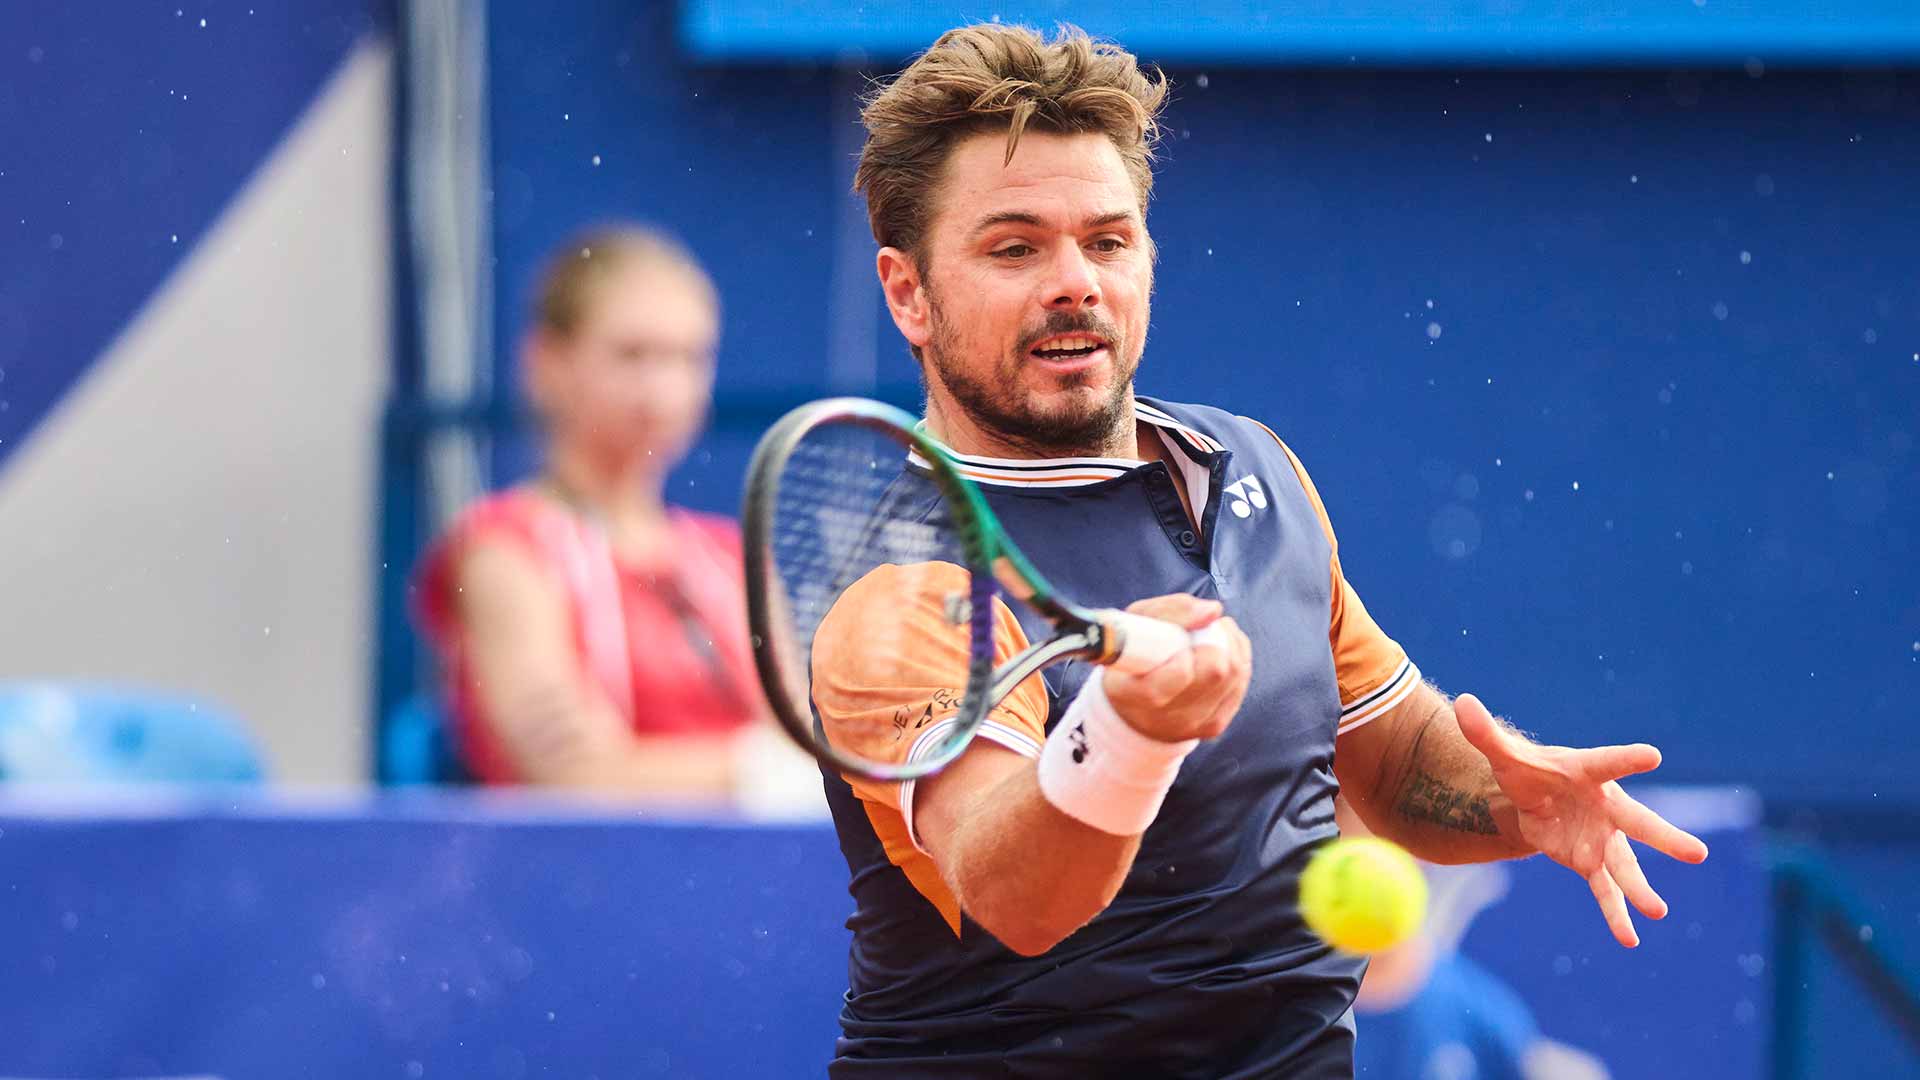 Stan Wawrinka lifted the trophy in Umag 2006.